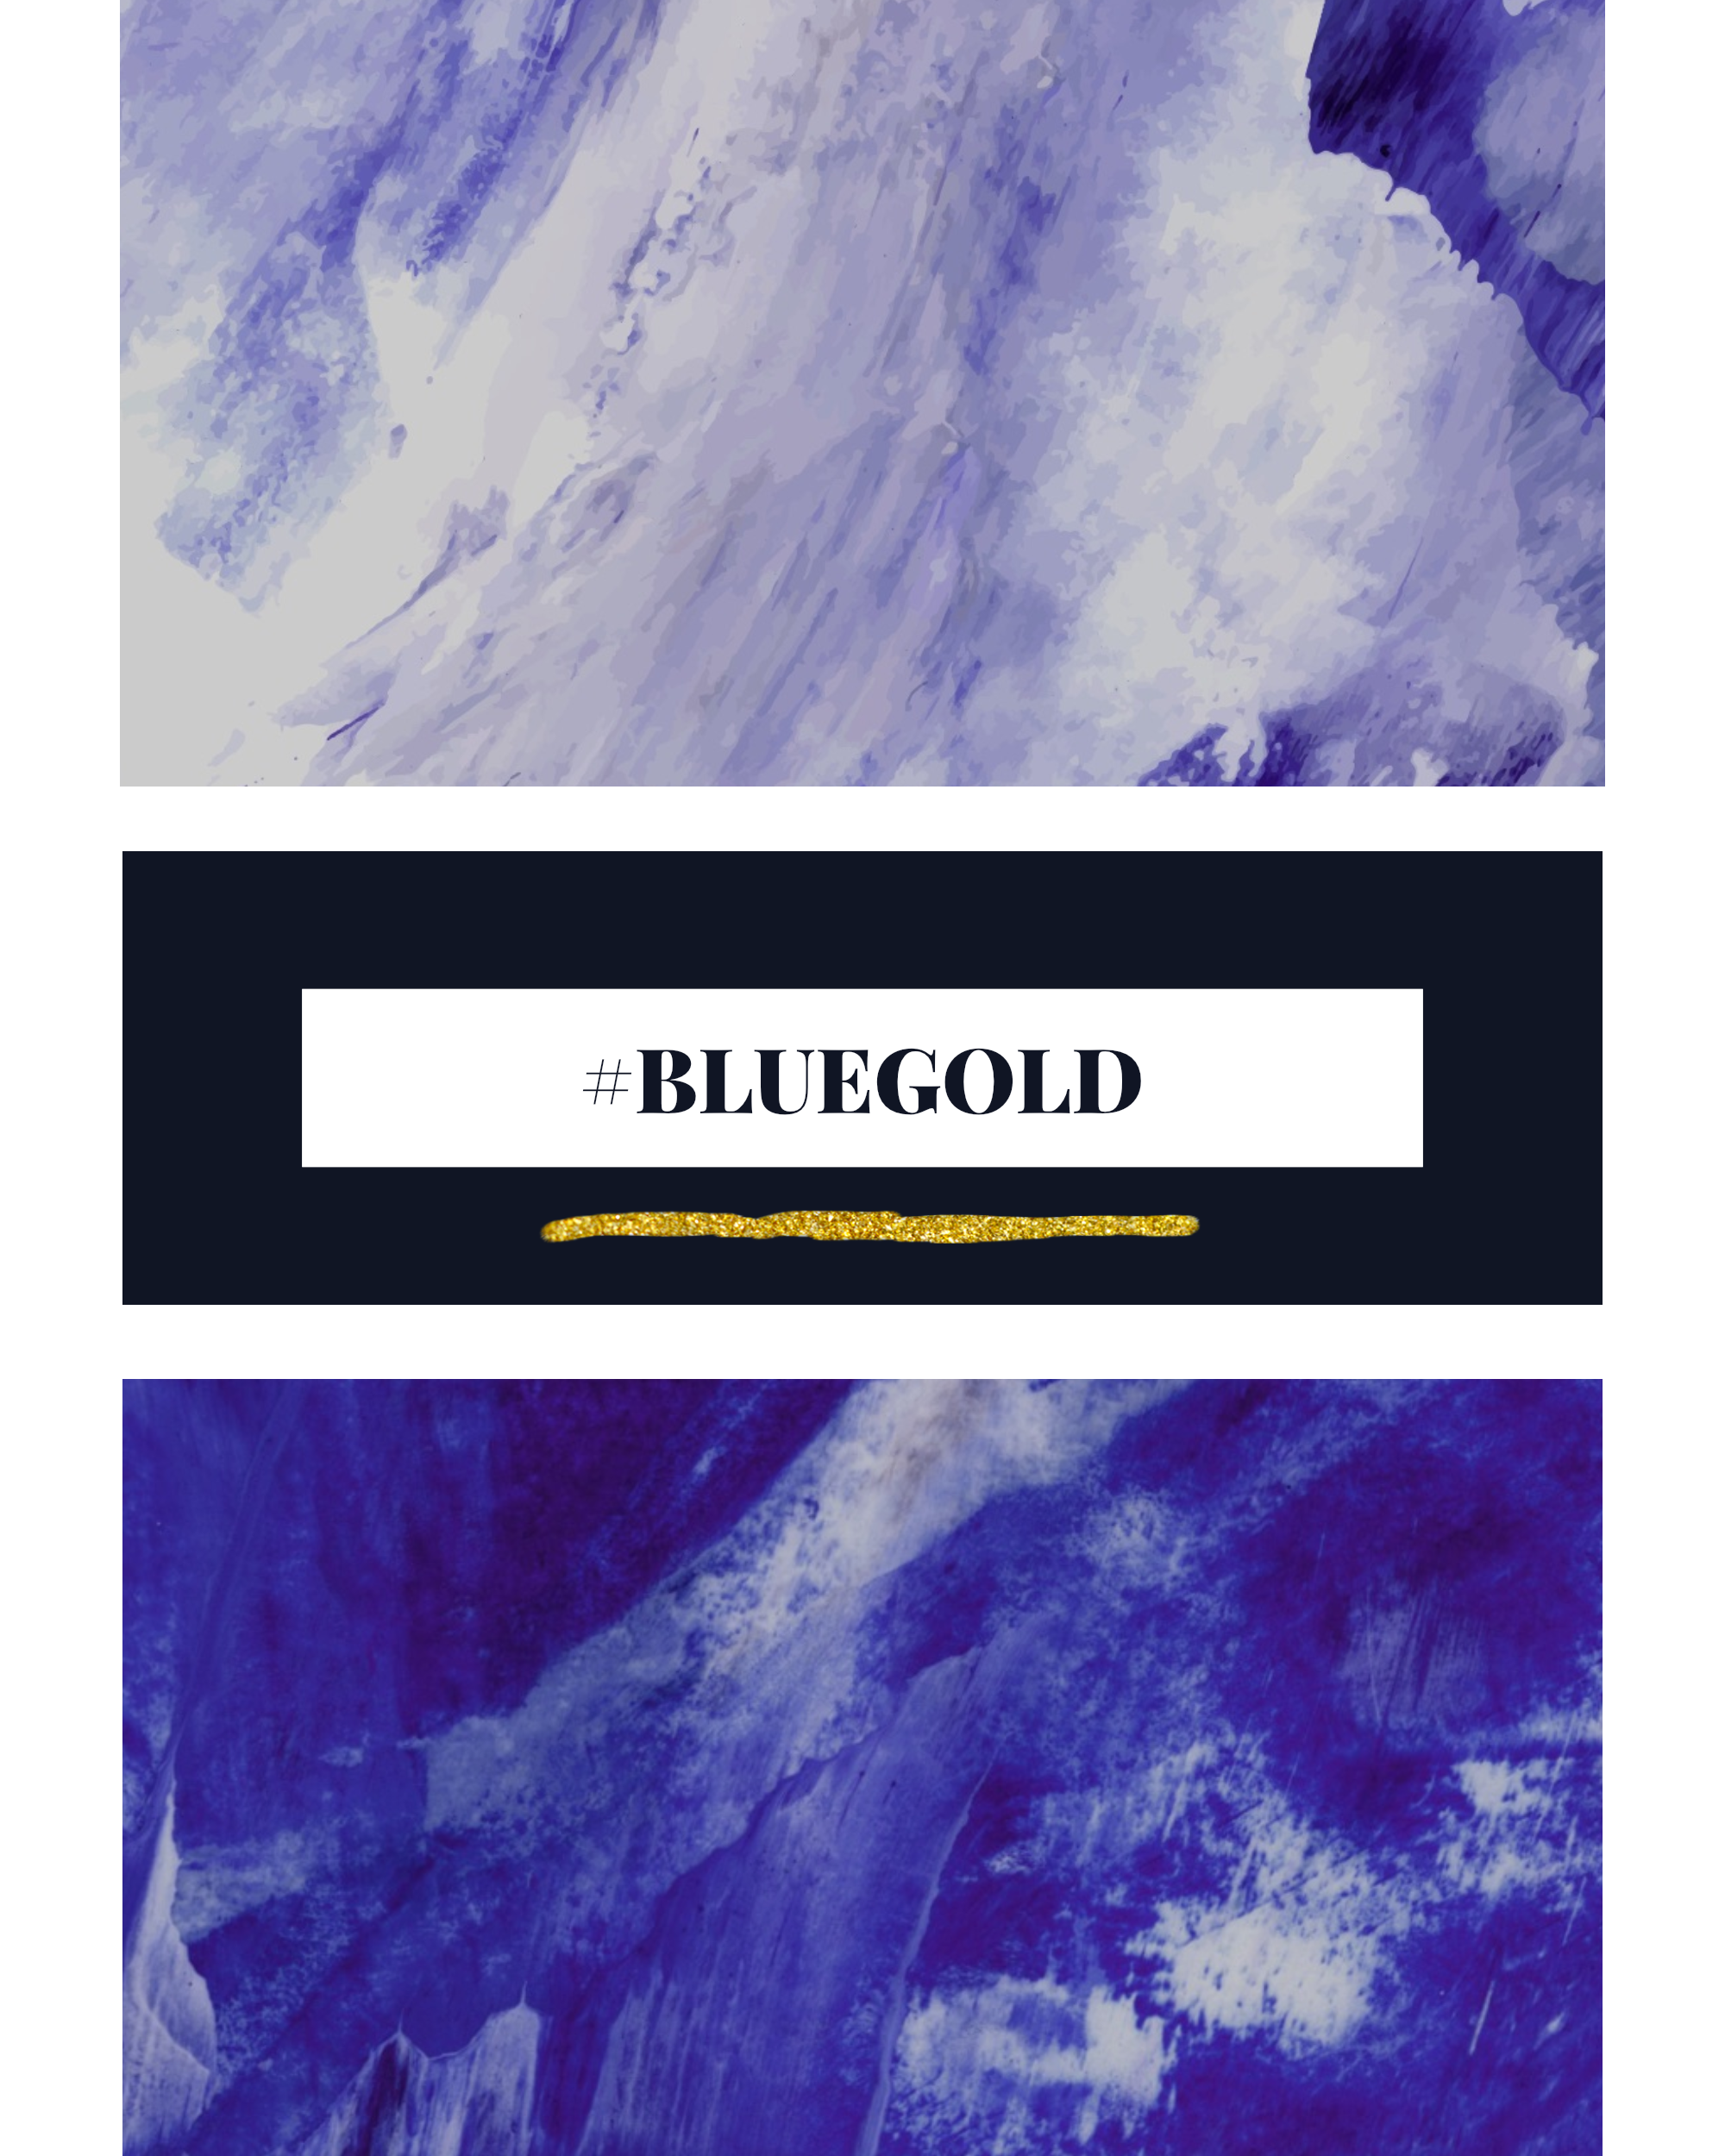 #bluegold Post collection - #BLUEGOLD Instagram Post Template